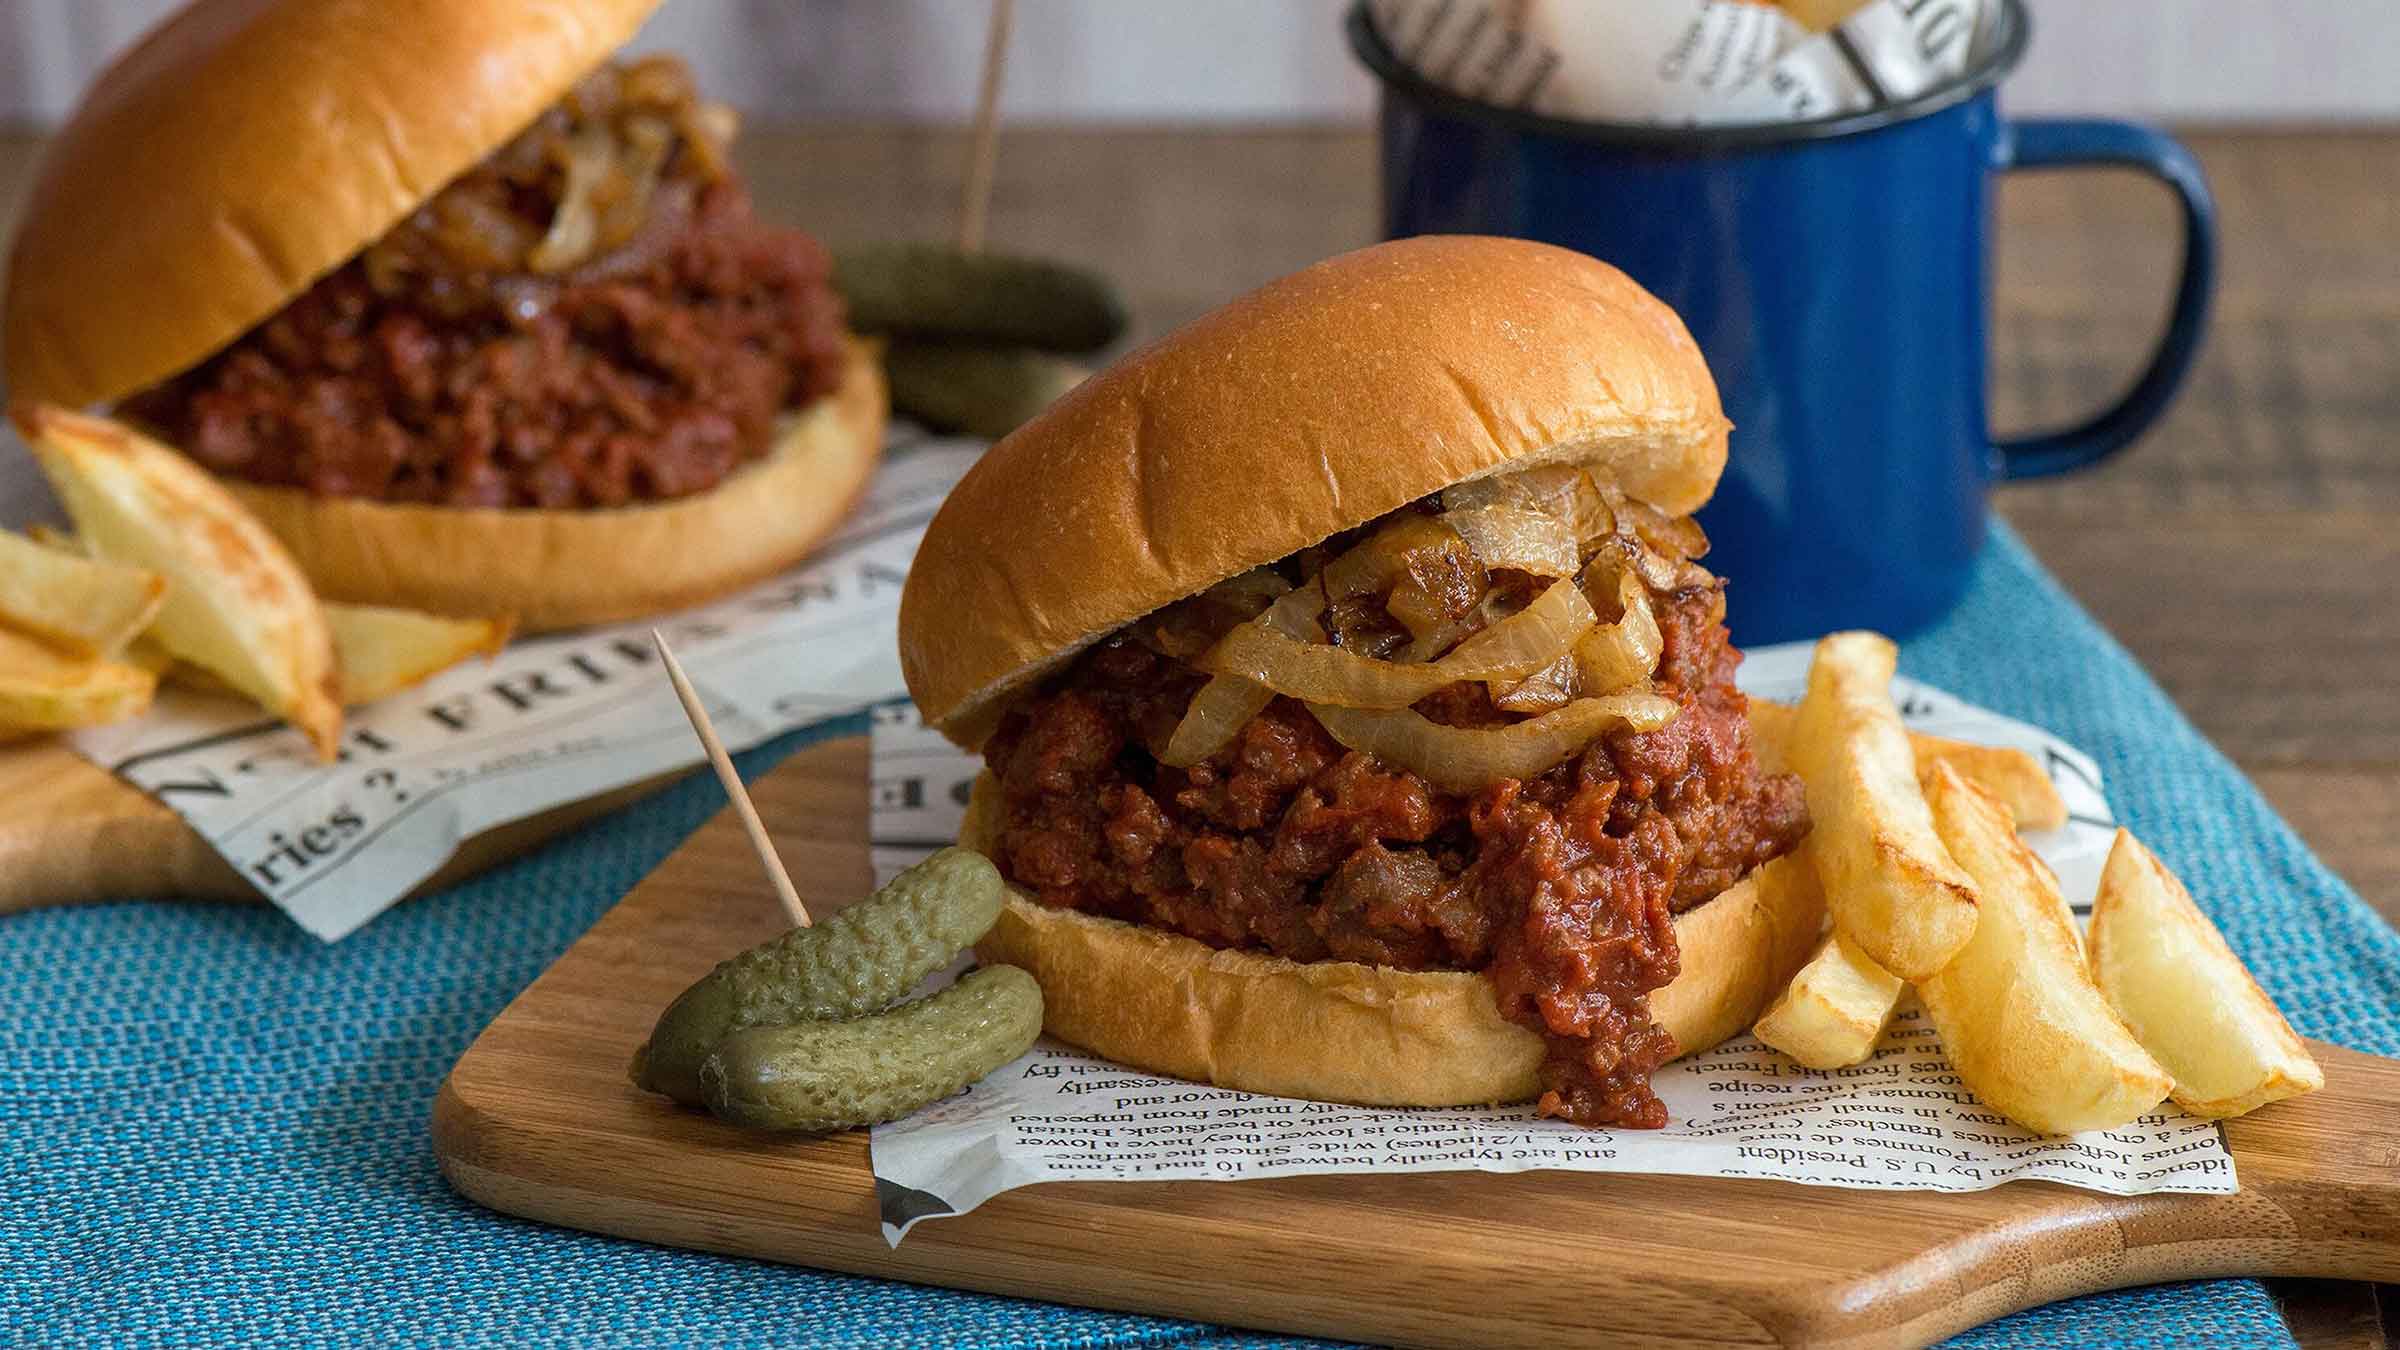 Steak Burger Sloppy Joes with Caramelized Onions